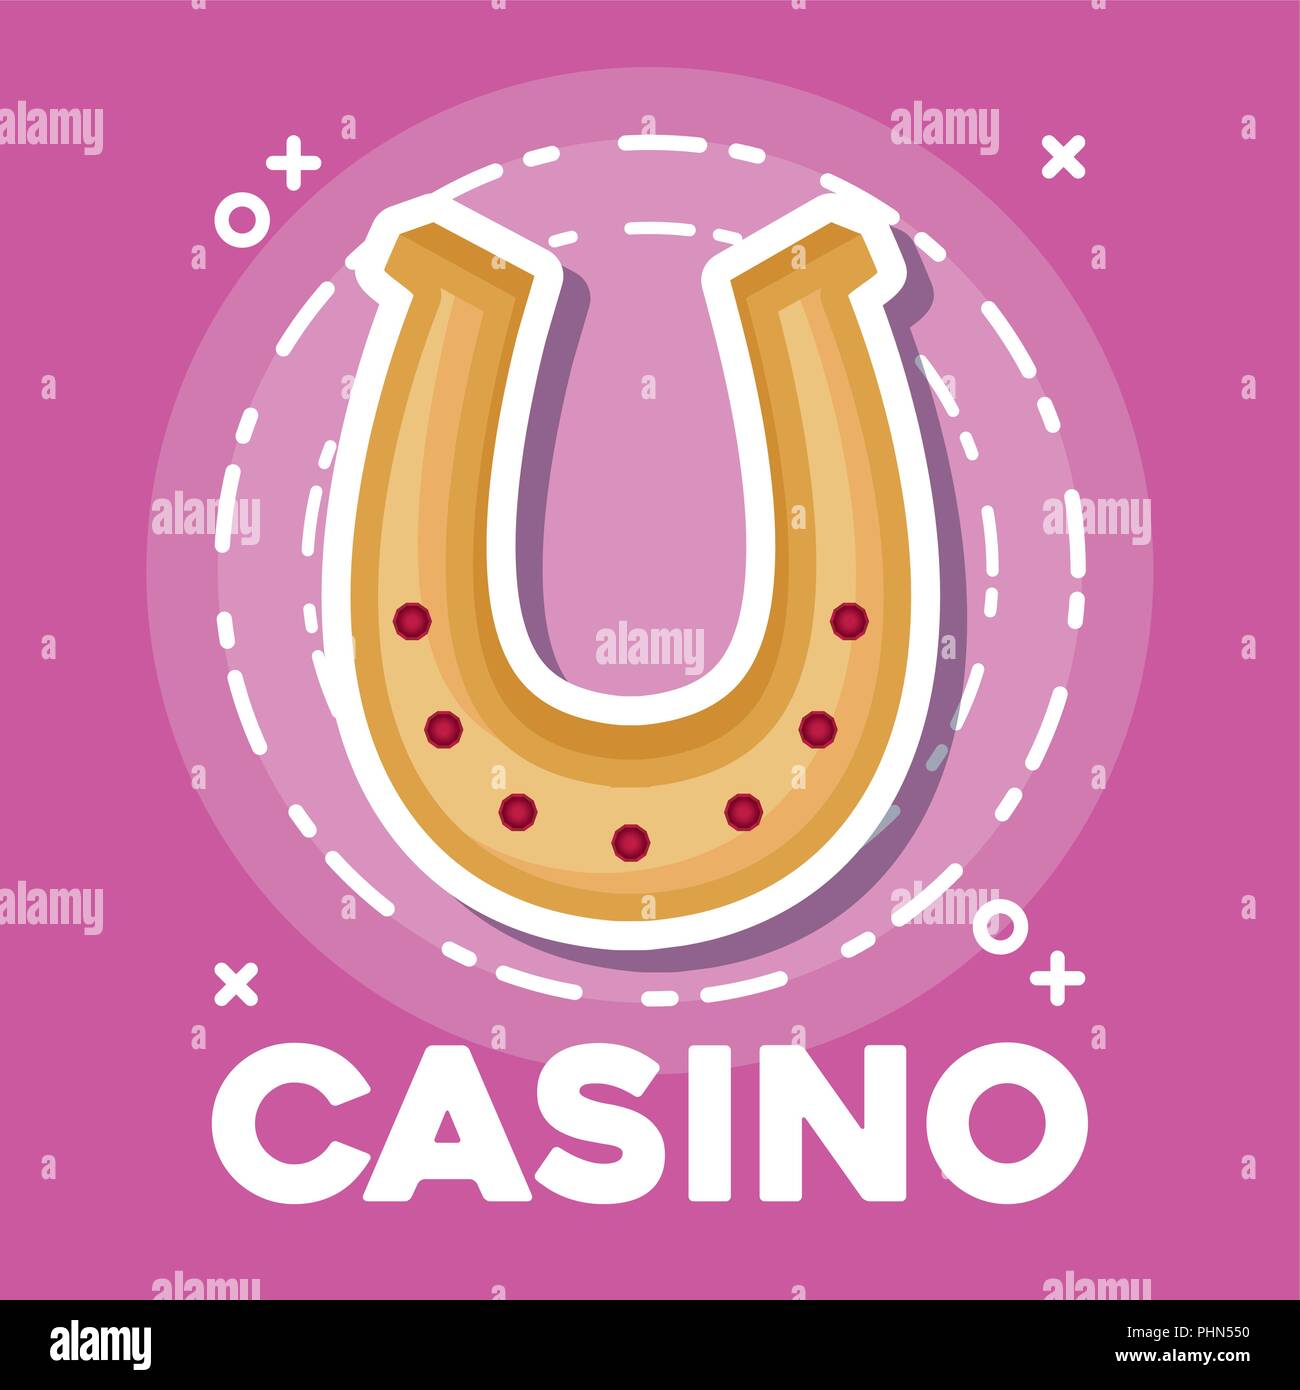 28 Binions Horseshoe Images, Stock Photos, 3D objects, & Vectors